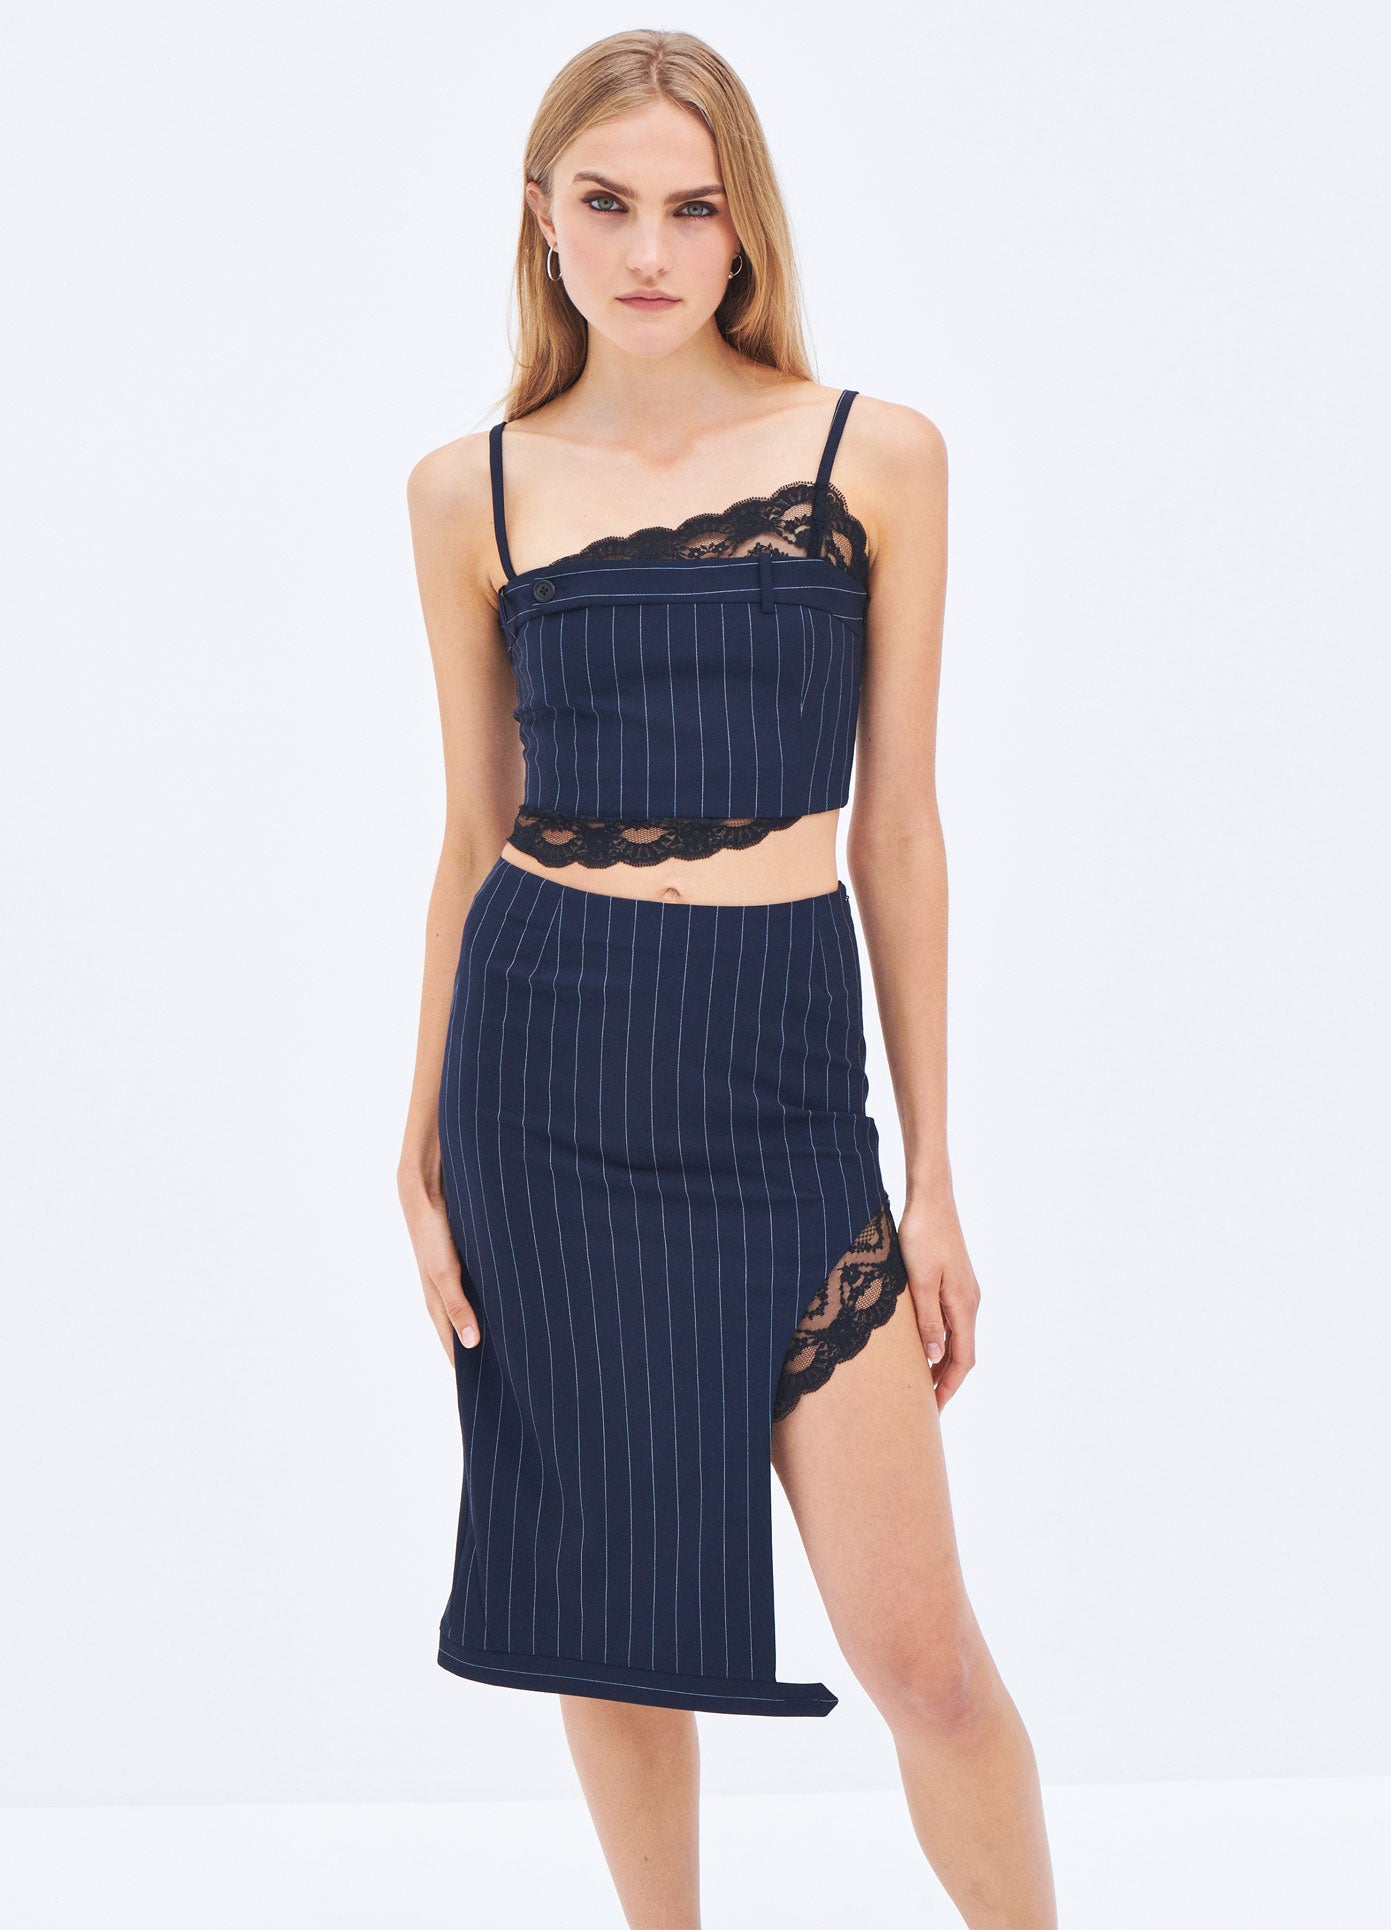 MONSE Spring 2024 Pinstripe Lace Trim Slit Skirt in Midnight on model front view